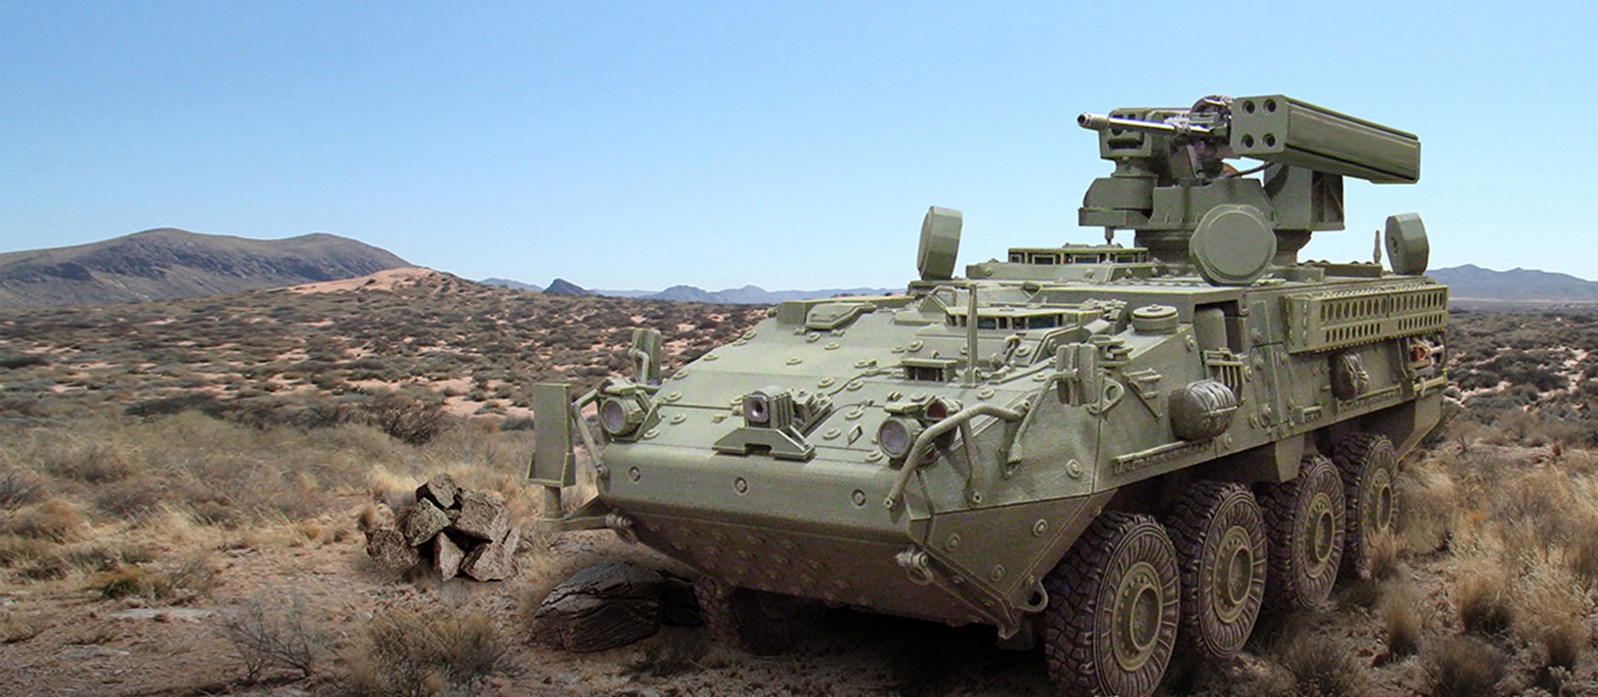 The Single Vehicle C-UAS Stryker makes sense for Brigade Combat Teams as it is common with the M-SHORAD Stryker shown here and requires fewer soldiers to operate.